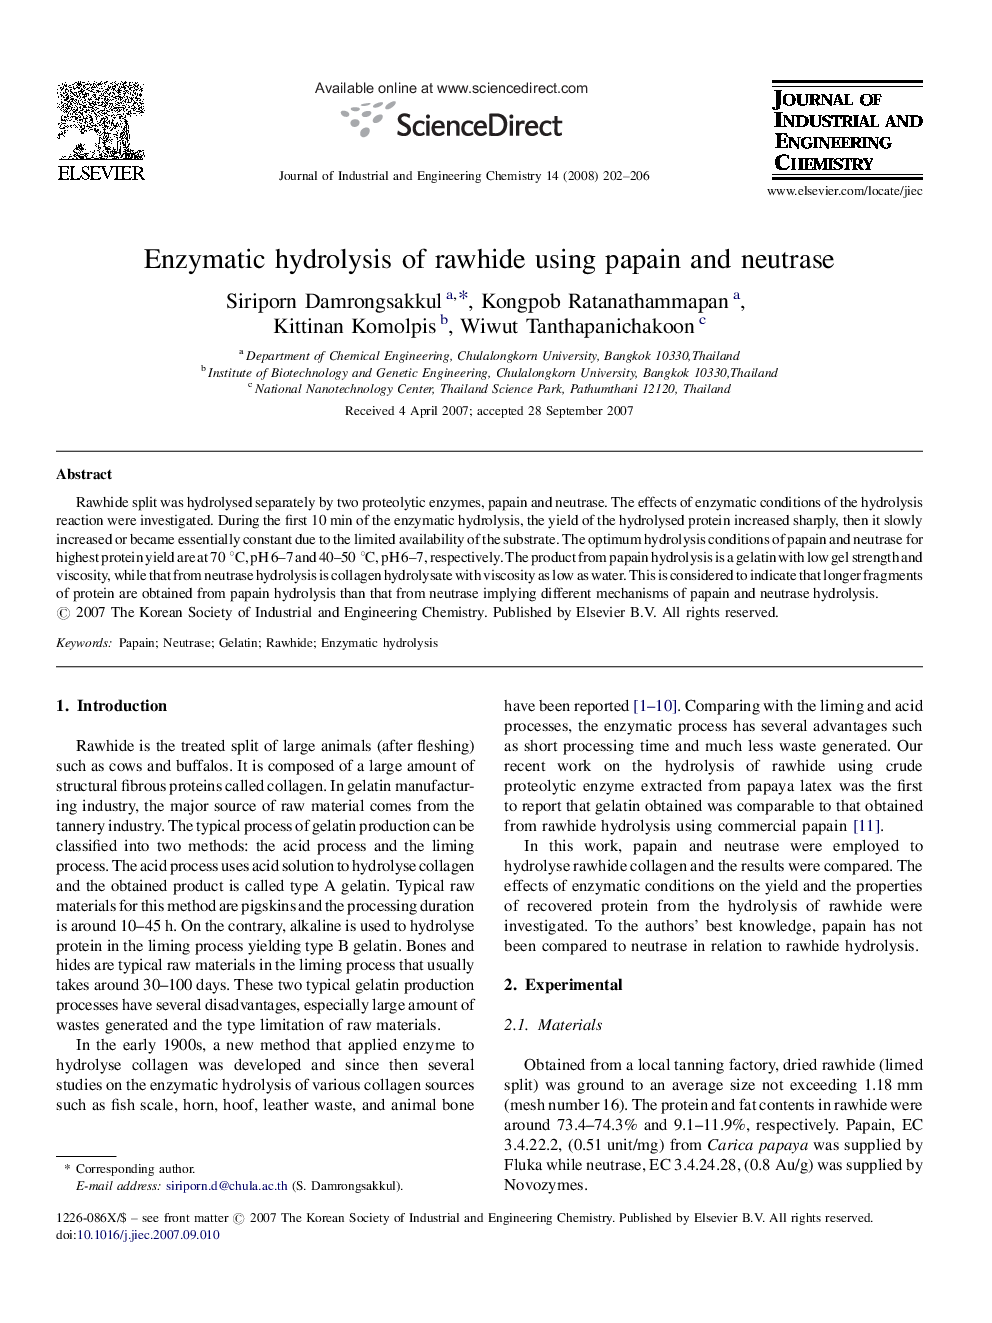 Enzymatic hydrolysis of rawhide using papain and neutrase